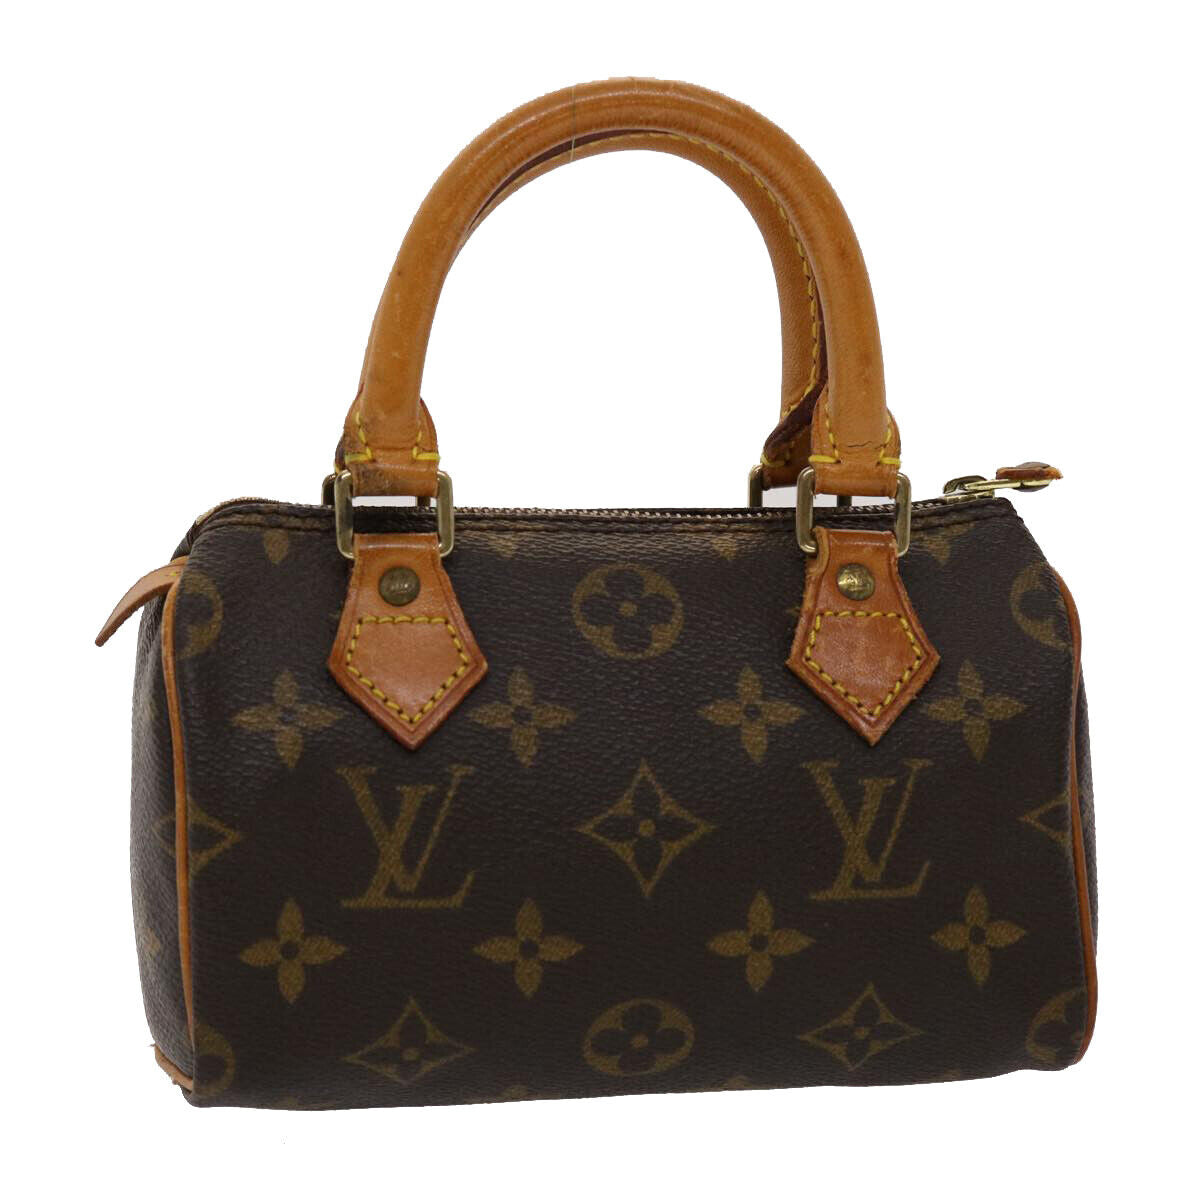 Louis Vuitton Speedy bag – Where to buy vintage and secondhand